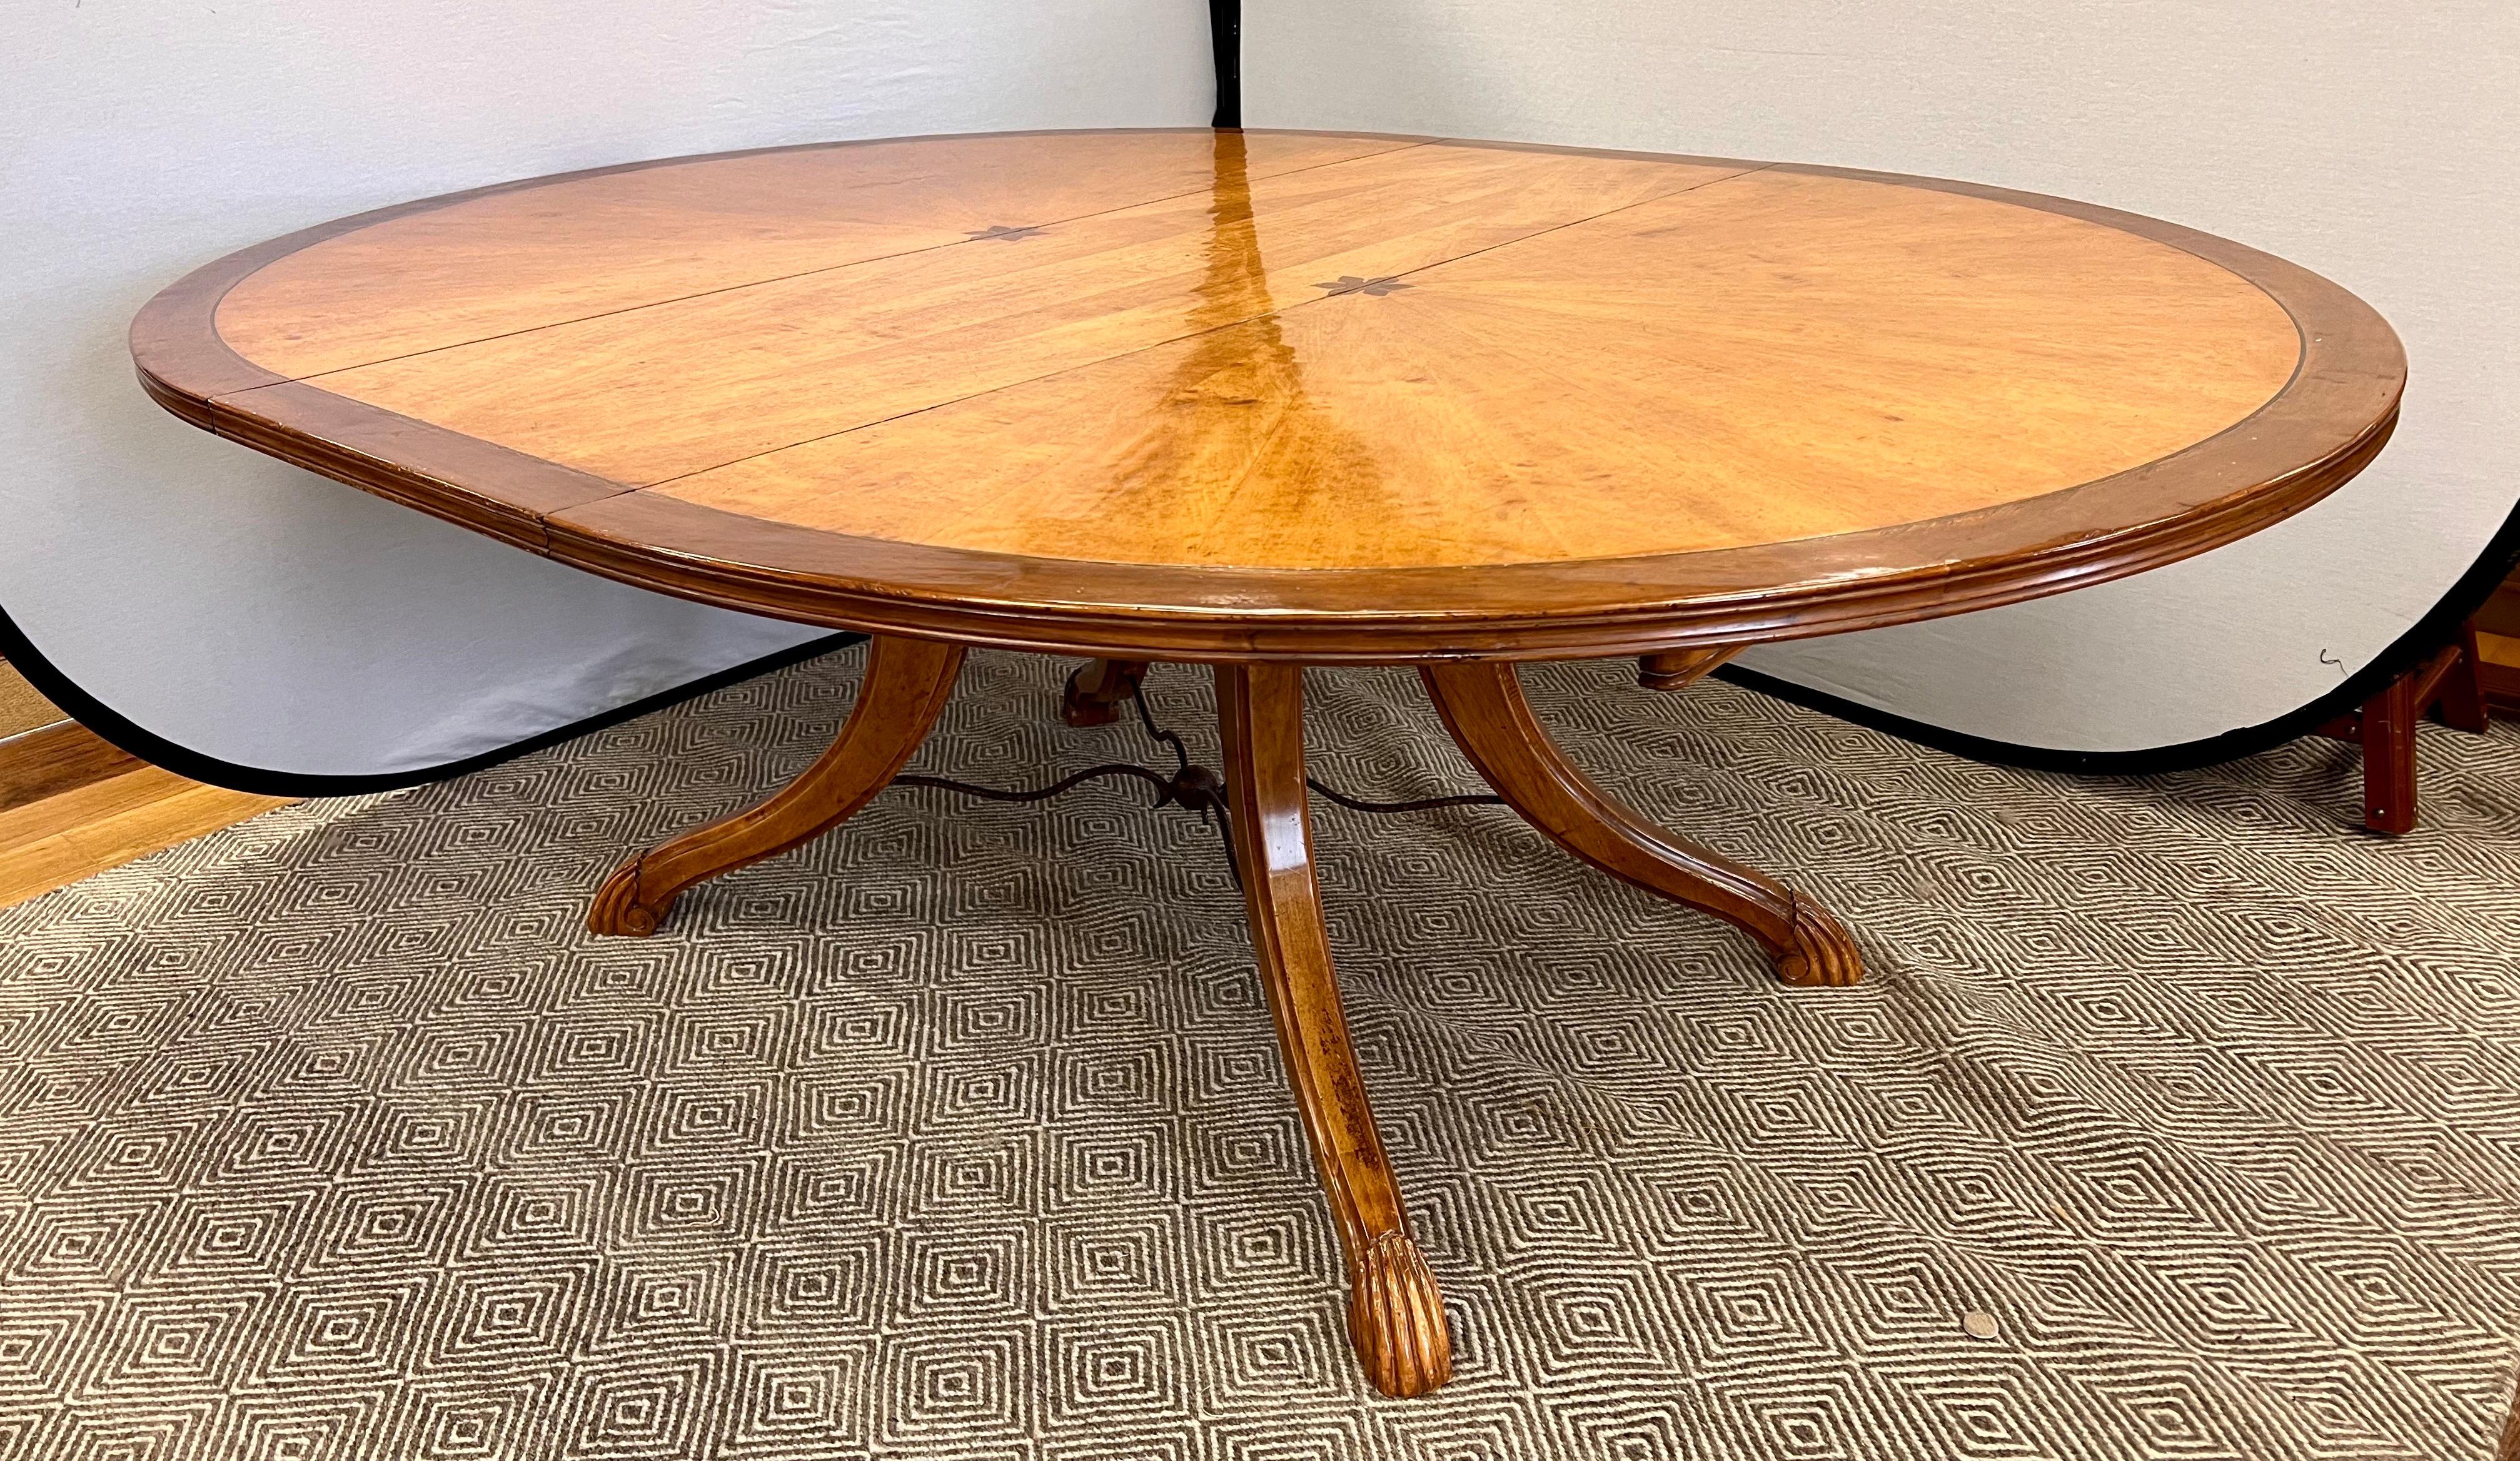 Stunning handcrafted custom banded pedestal dining table by Emanuel Morez. 
Finished with walnut banding on cherry finish.
Hand-planed, distressed, antiqued, and waxed.
Sunburst pattern top with brass inlay.
Carved claw feet with cross iron